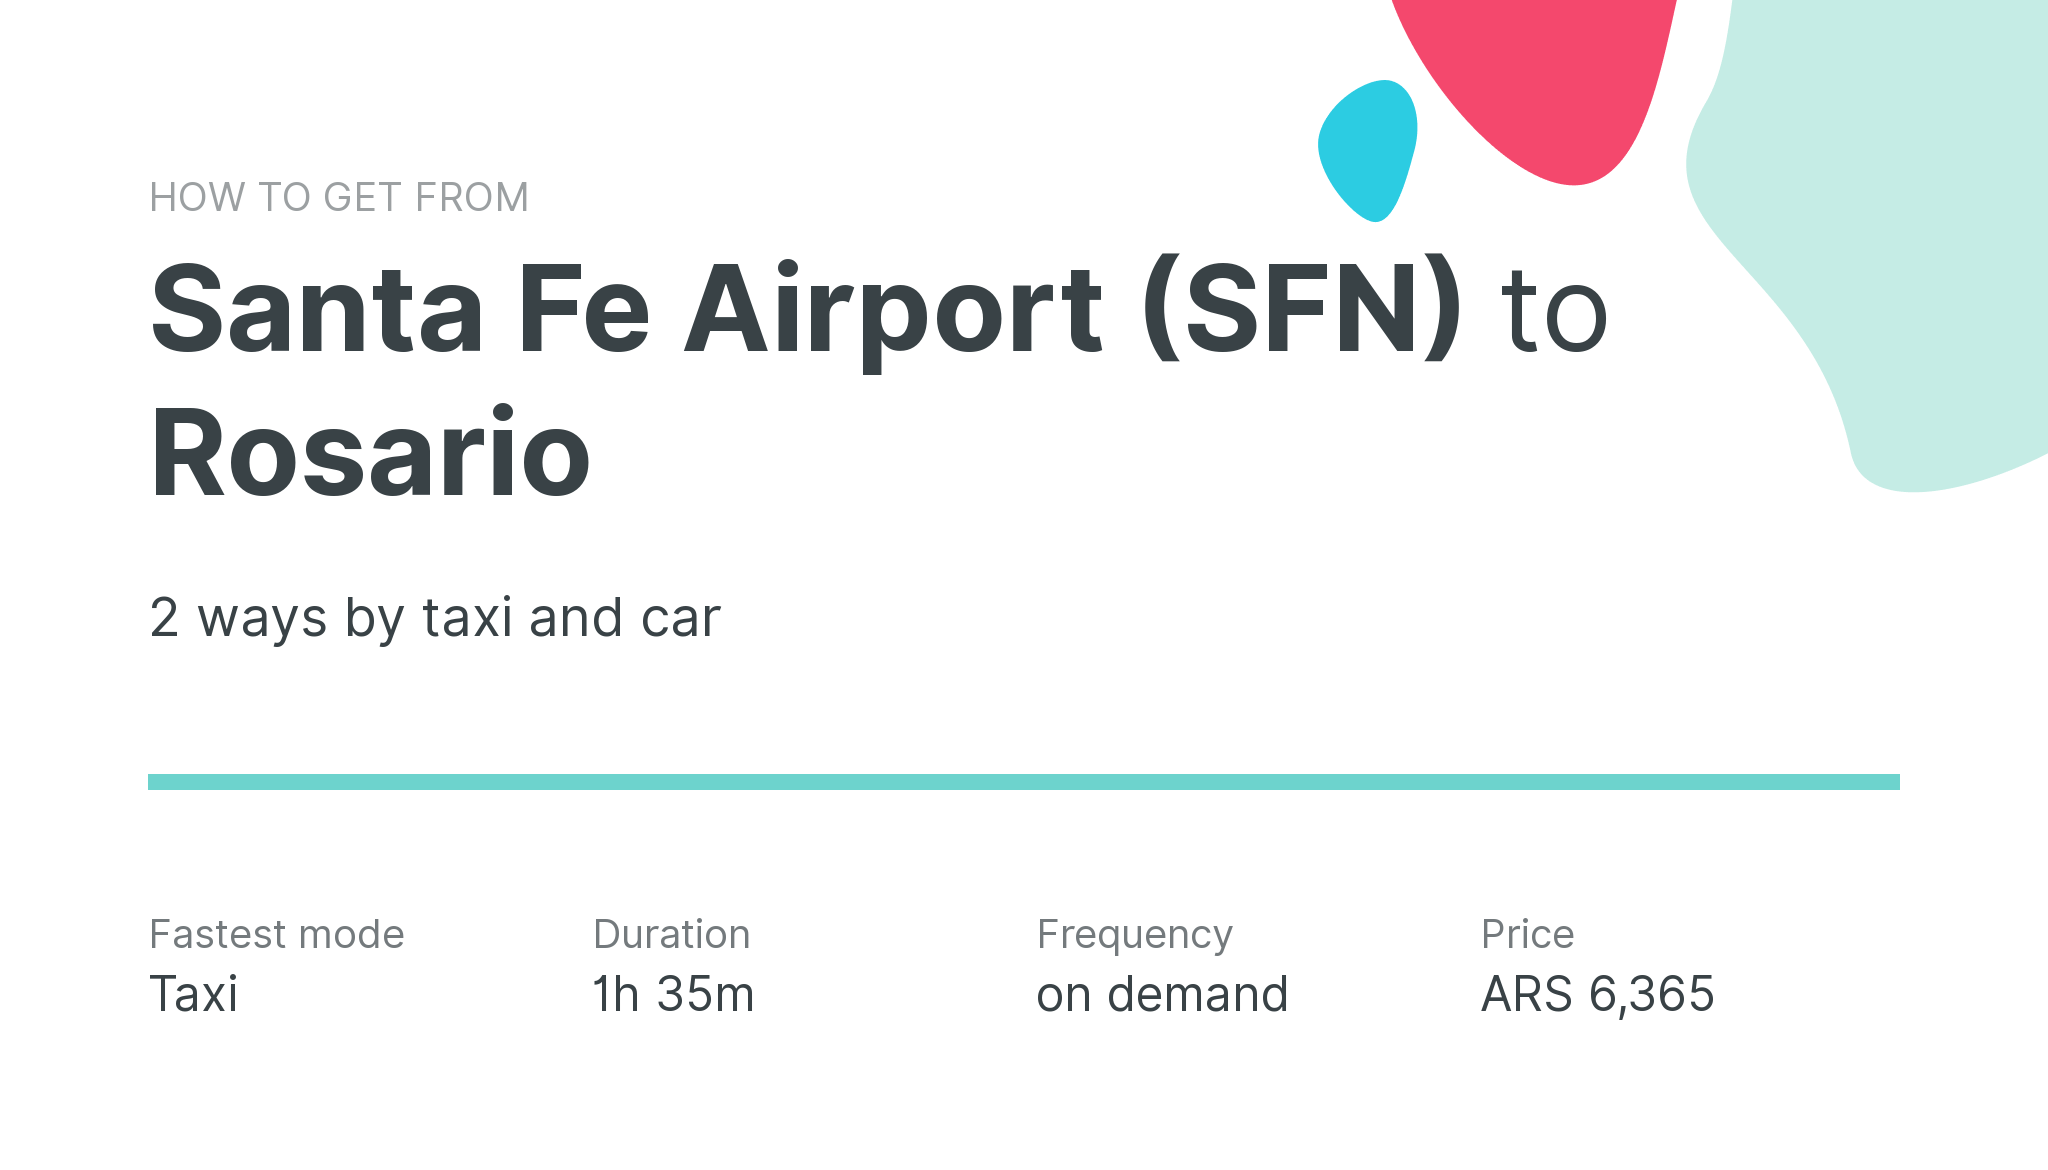 How do I get from Santa Fe Airport (SFN) to Rosario